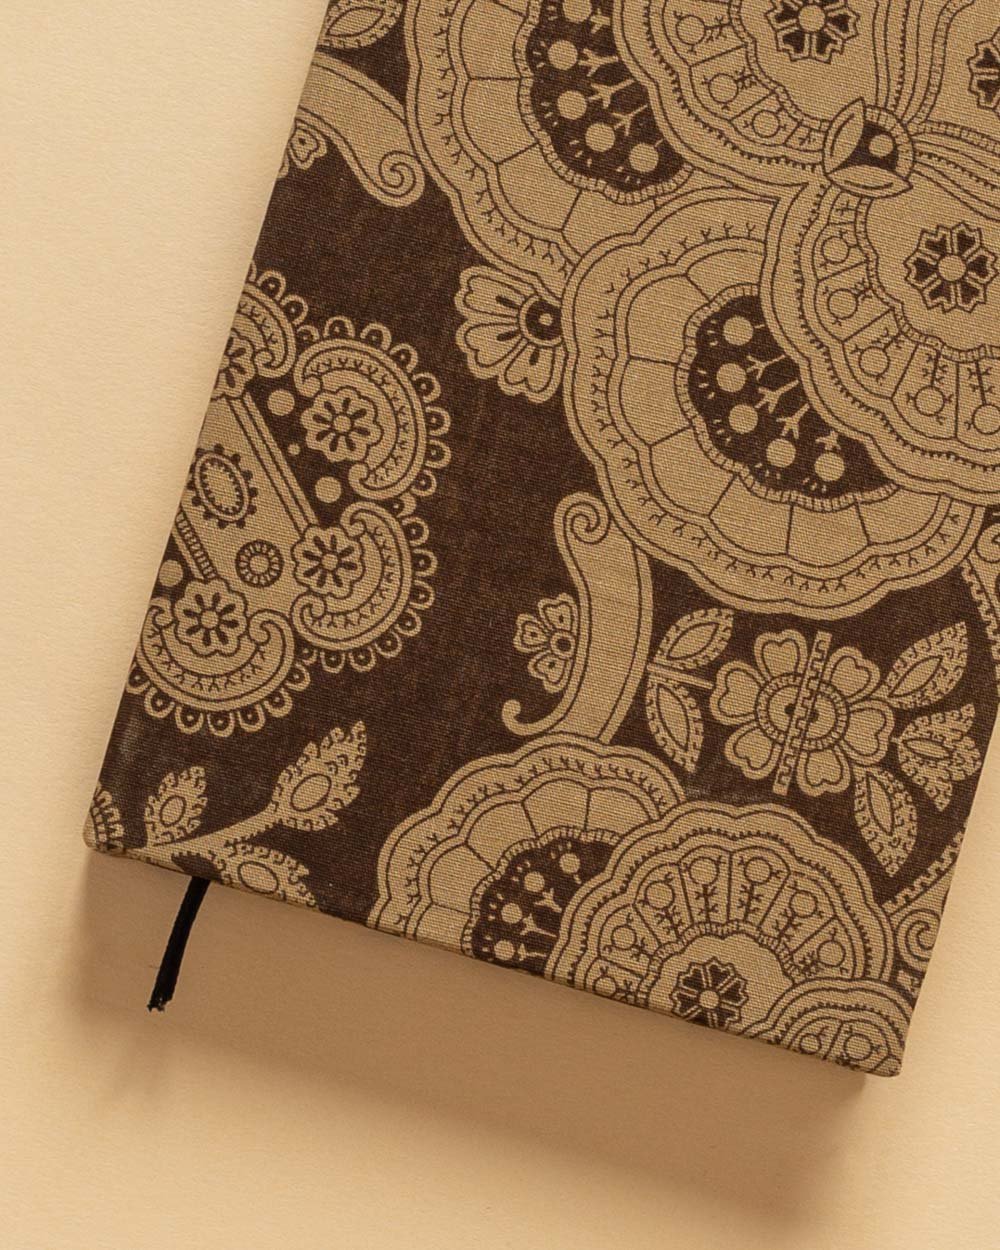 Fabric-covered A6 notebook made of 100% recycled paper and cardboard - 029